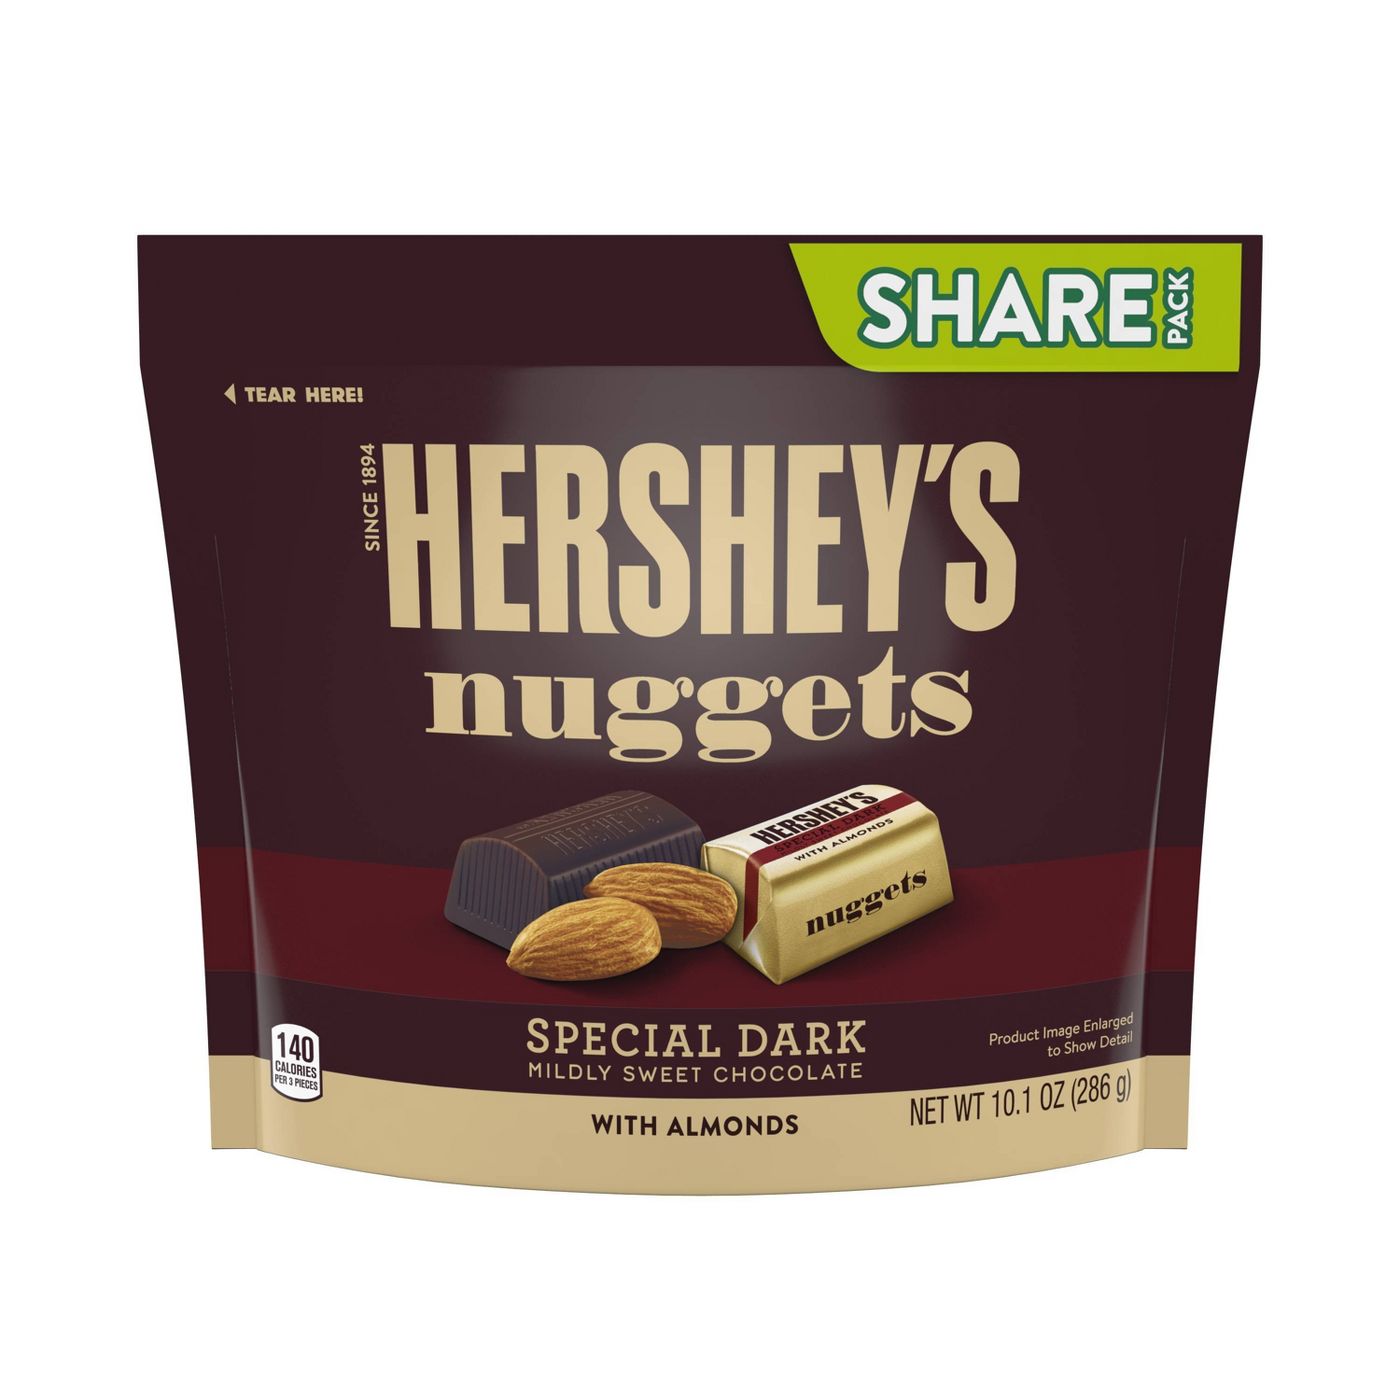 Hershey's Nuggets Dark Chocolate with Almonds, Share Size, 10.1oz